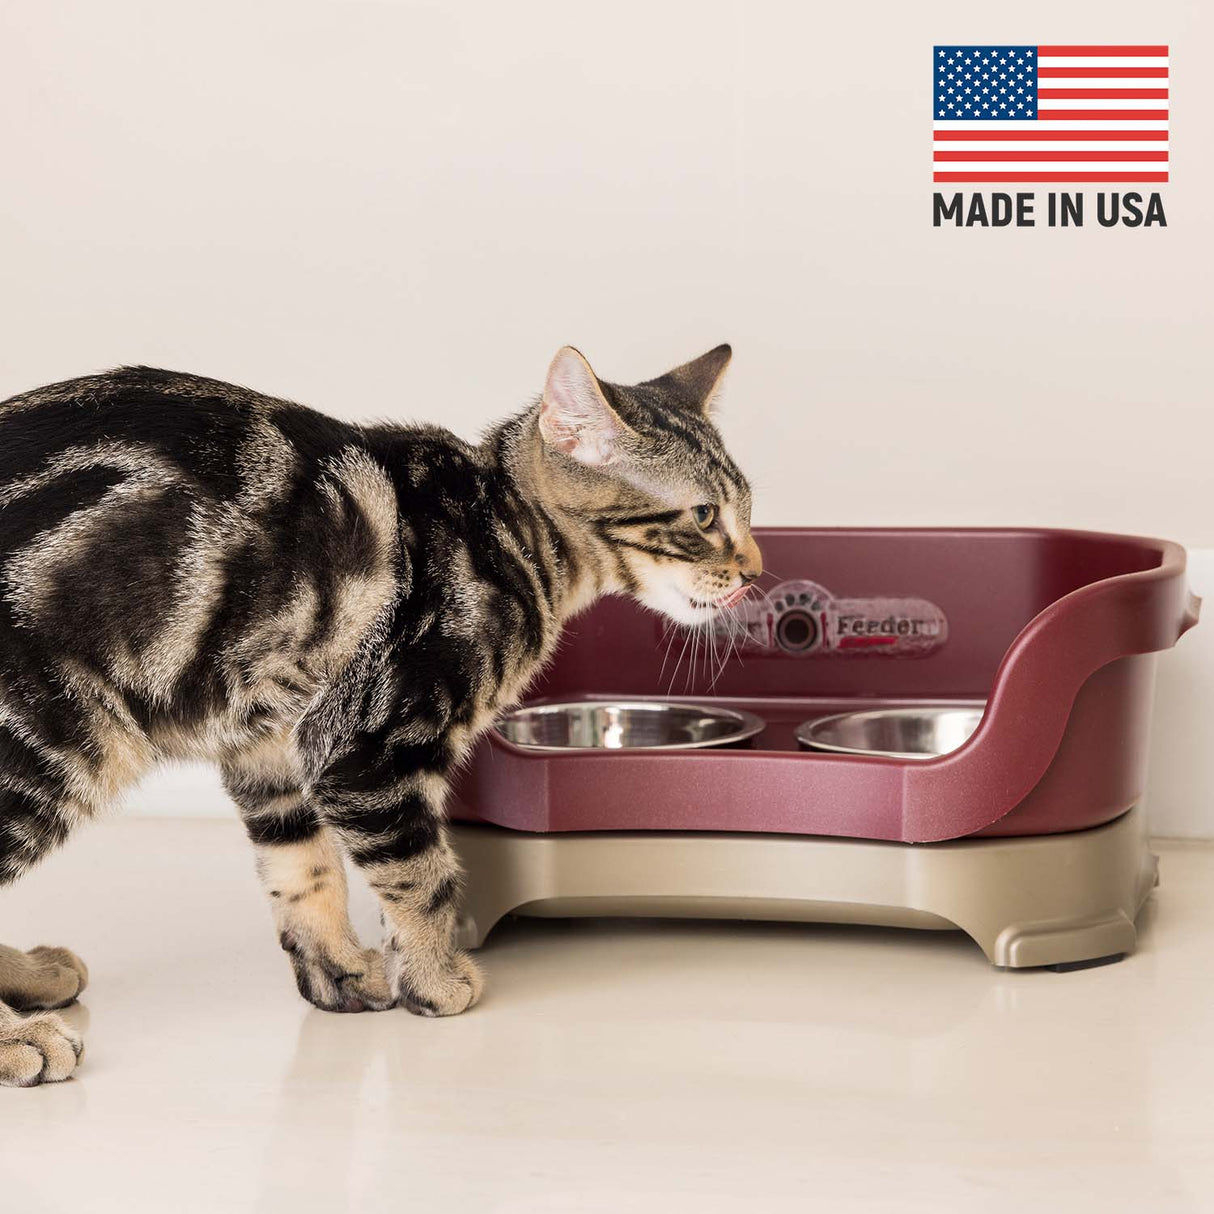 Cat eating from Cranberry Neater Feeder Deluxe - Made in the USA